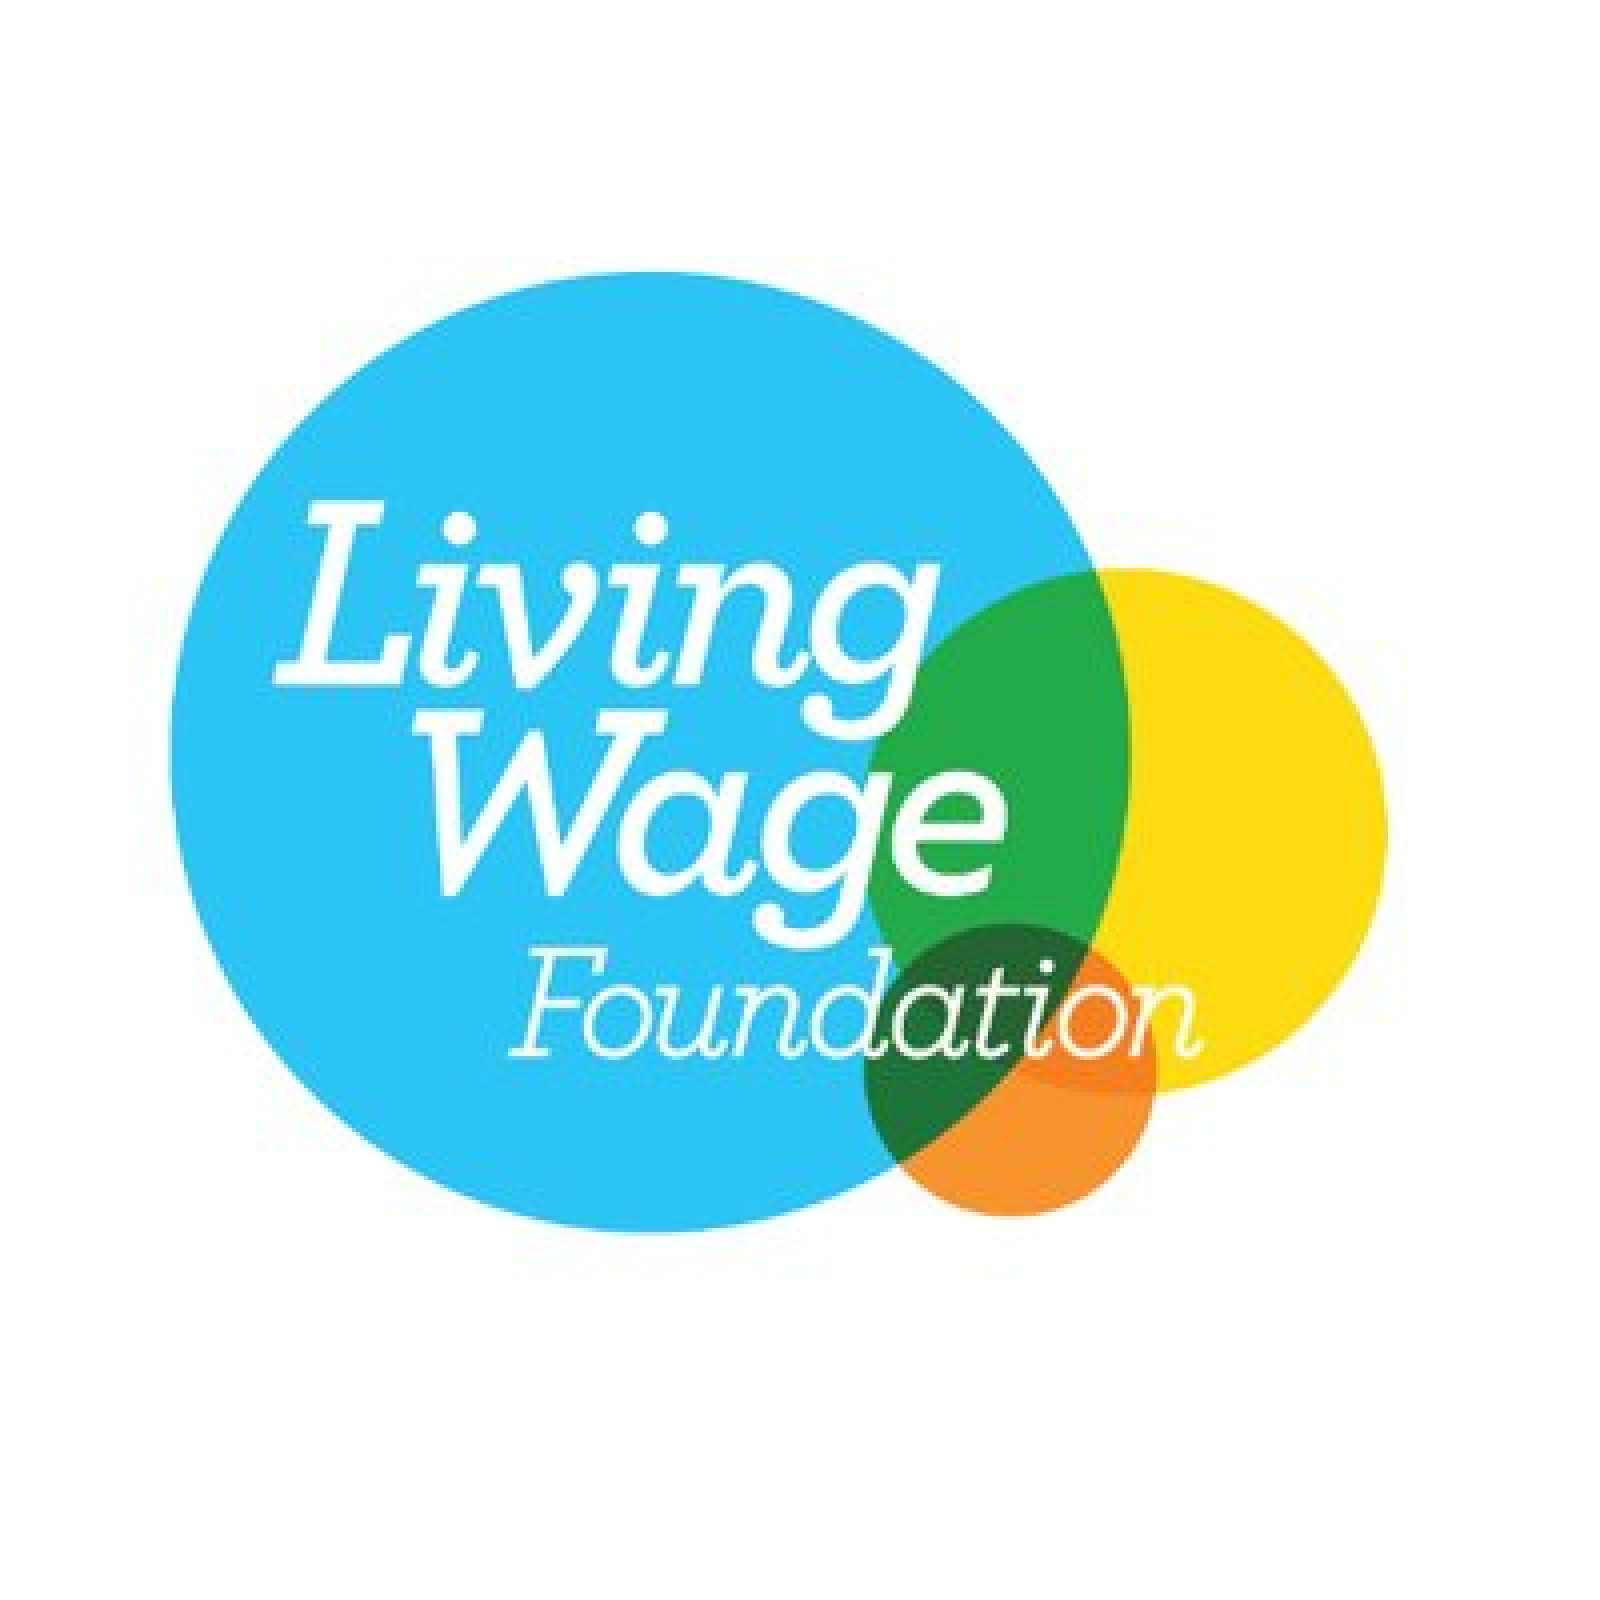 ROWAN PRECISION CELEBRATES COMMITMENT TO REAL LIVING WAGE